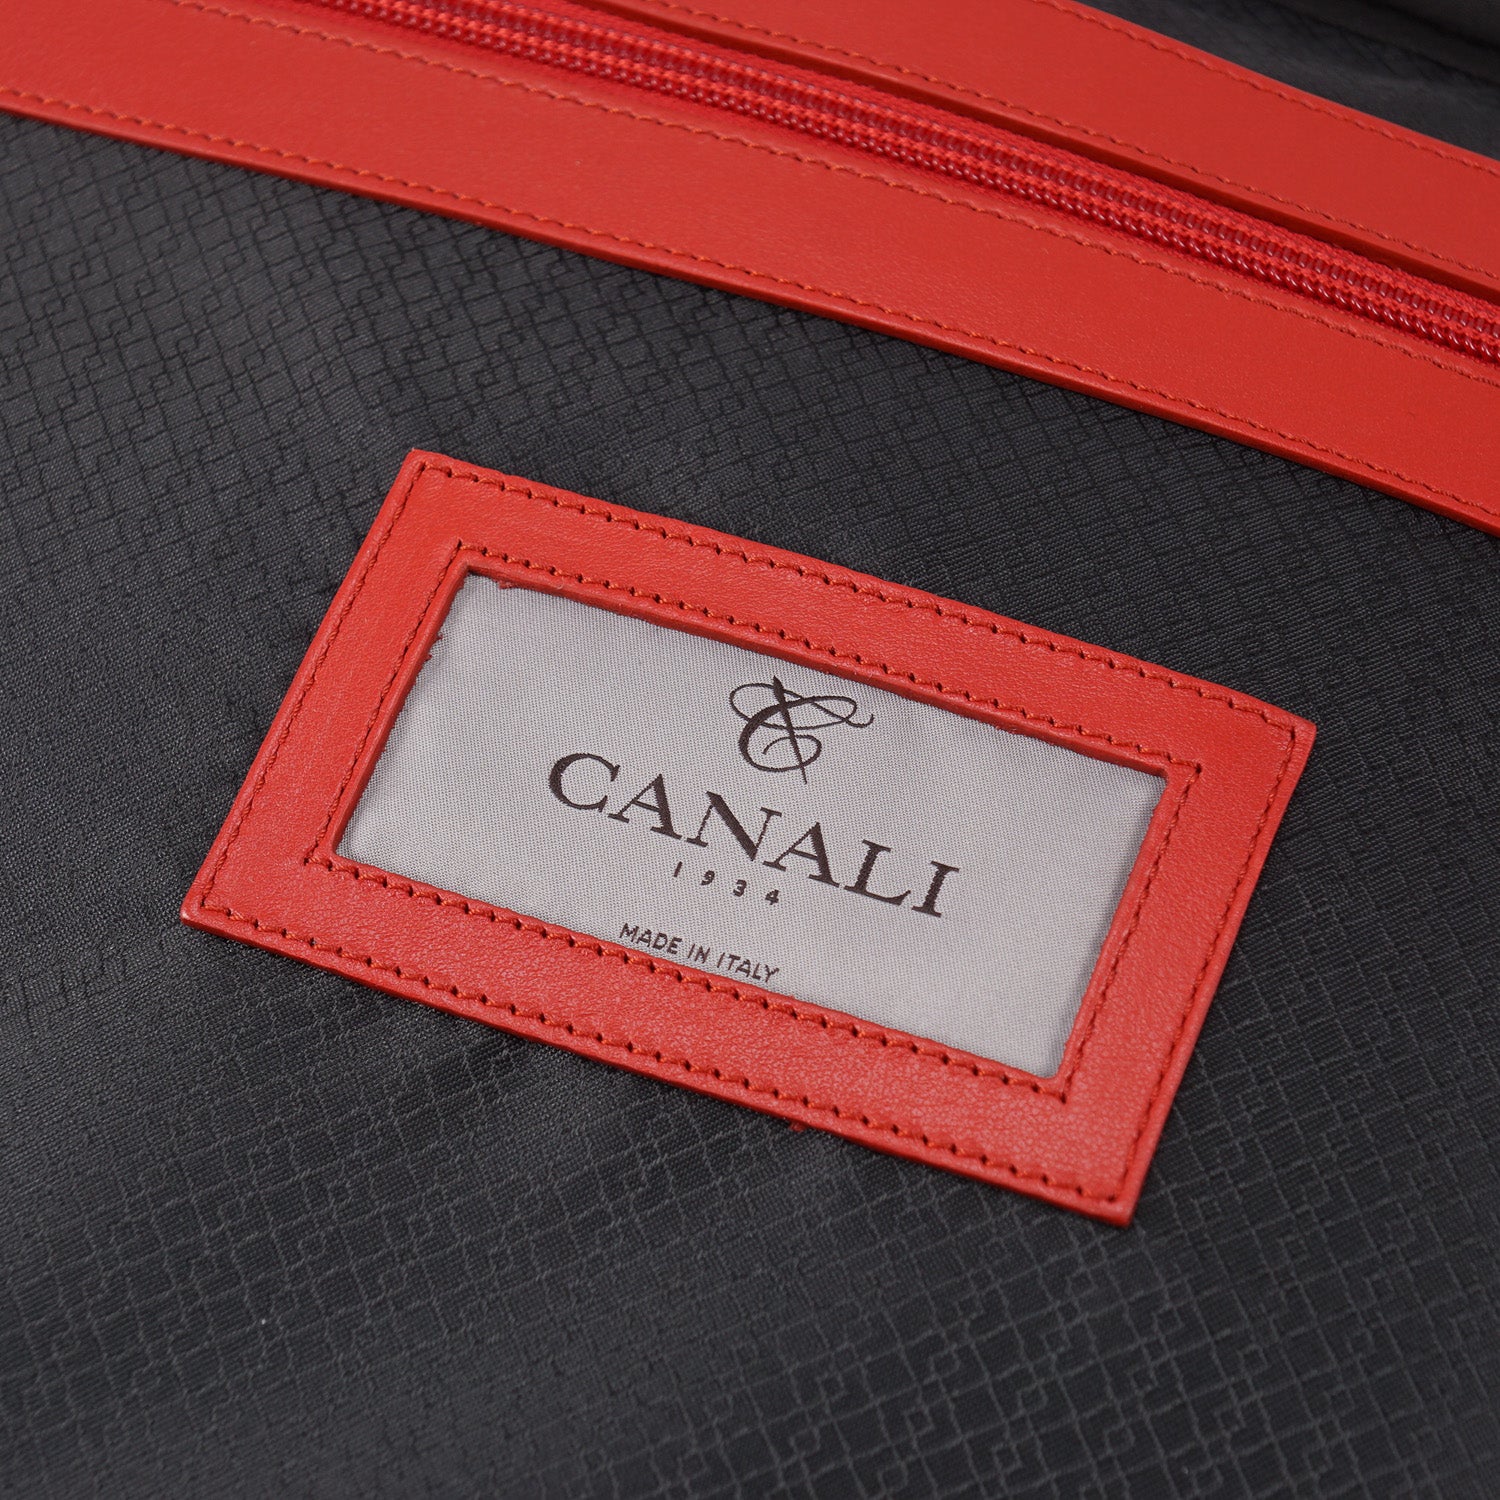 Canali Leather Carry-On Spinner Suitcase - Top Shelf Apparel